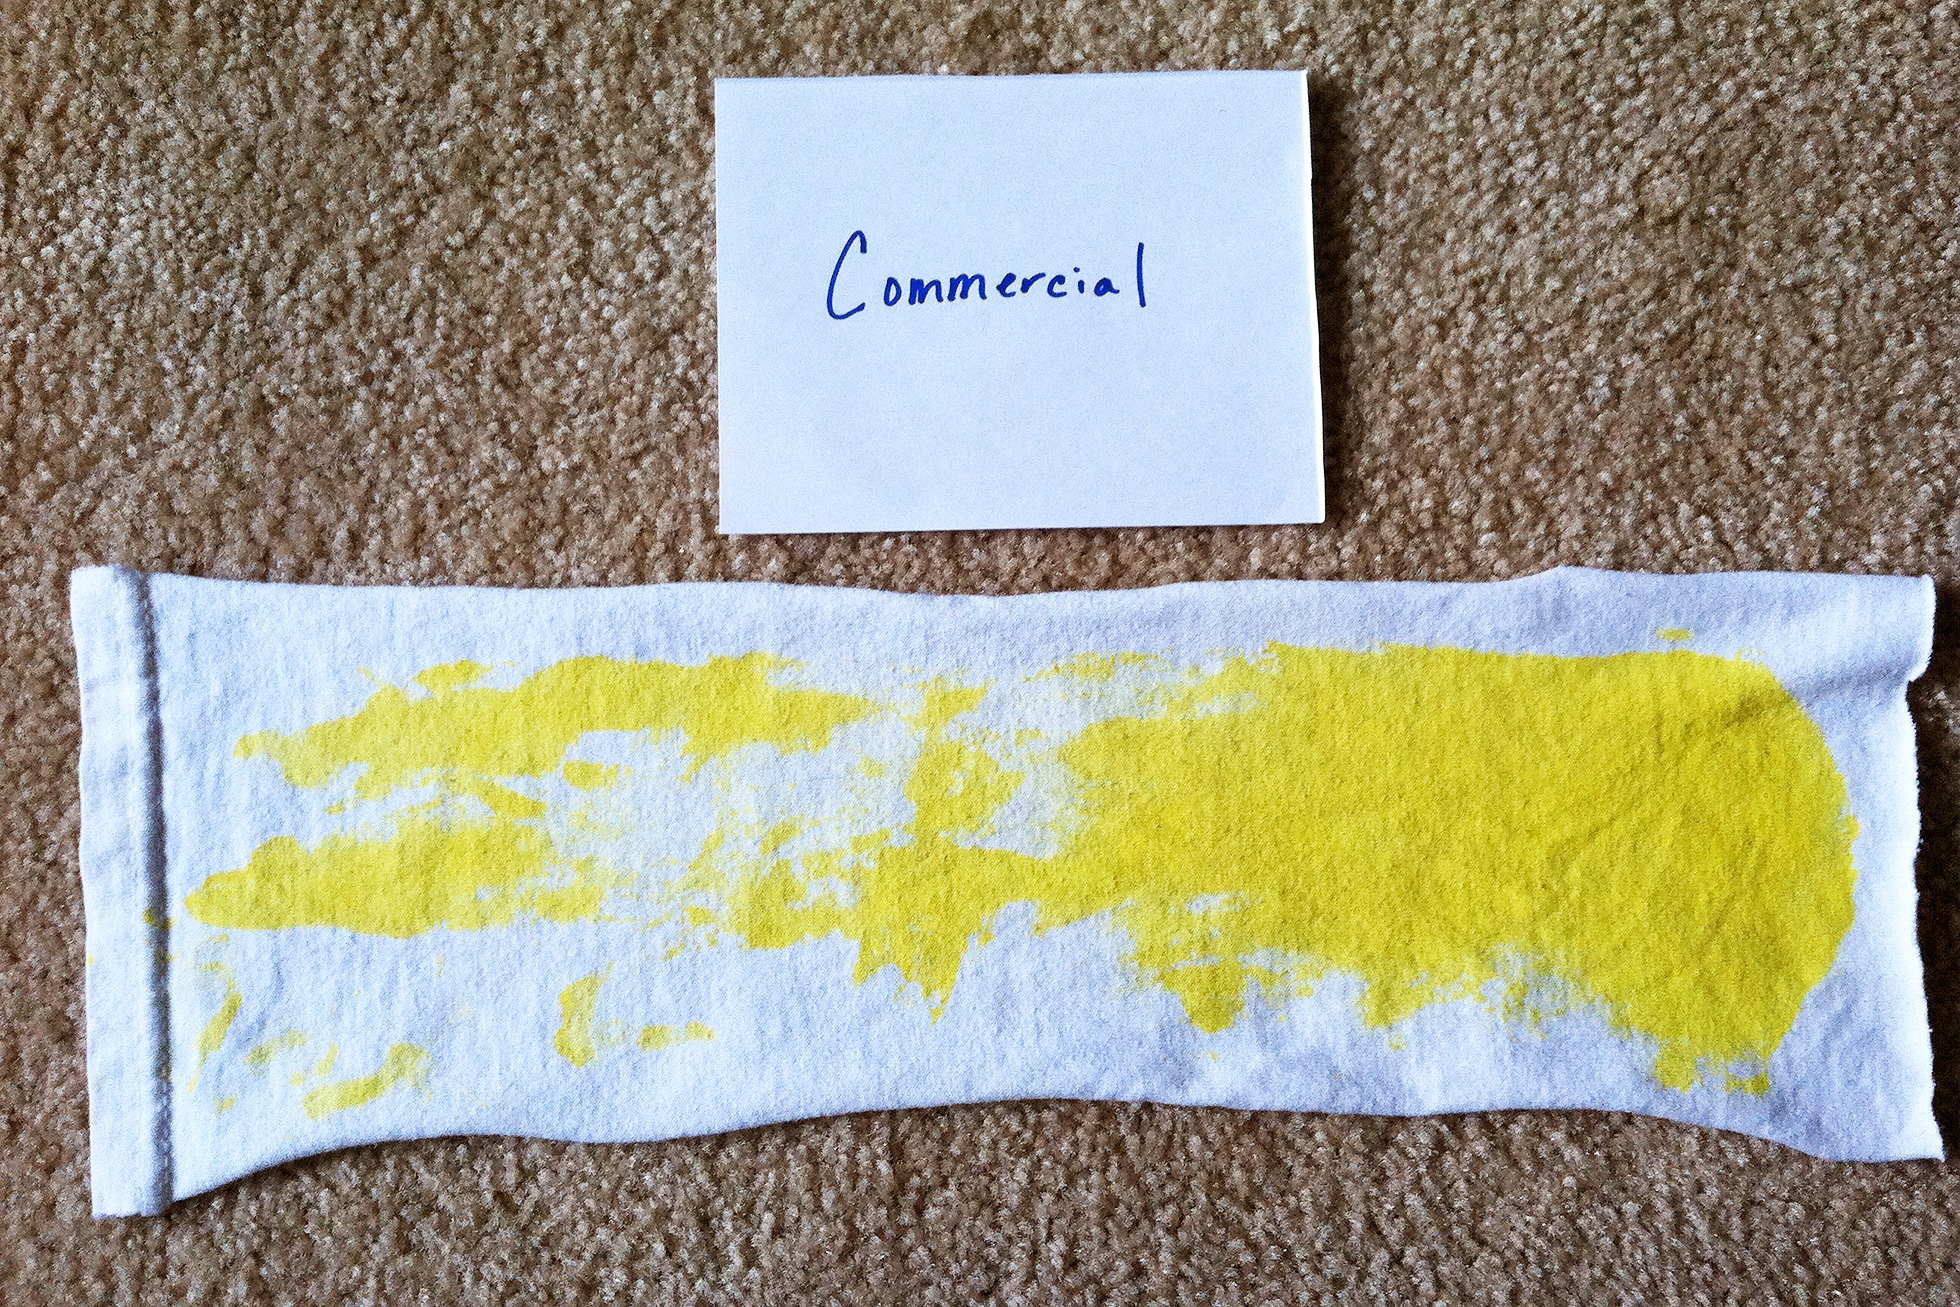 Test strip after washing with commercial laundry detergent